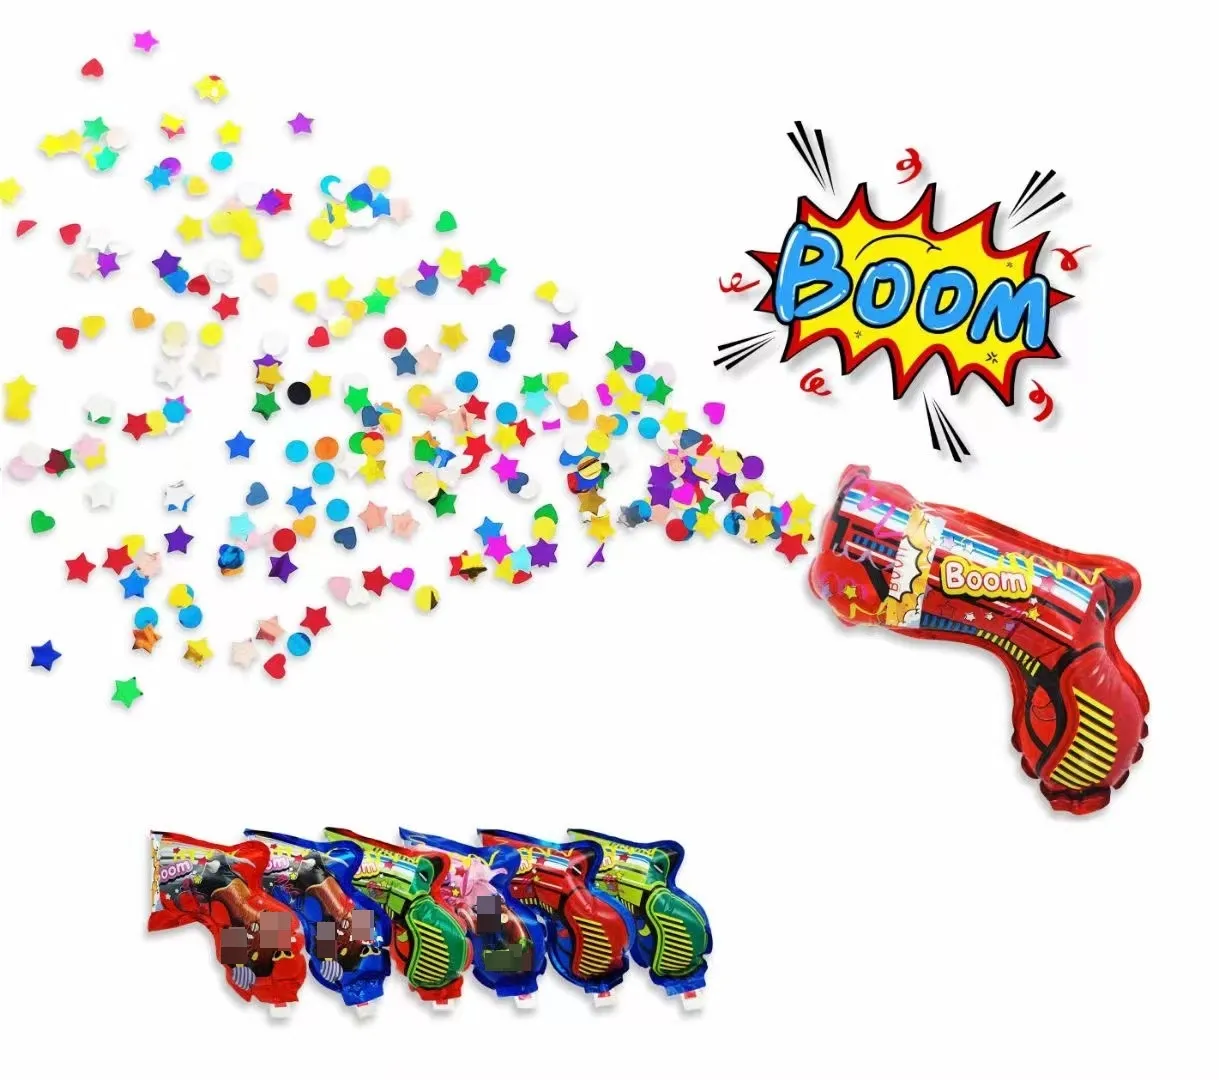 Automatic inflatable Fireworks Sequins confetti Boom gun foil balloons props for Wedding Birthday Christmas Grad party supplies